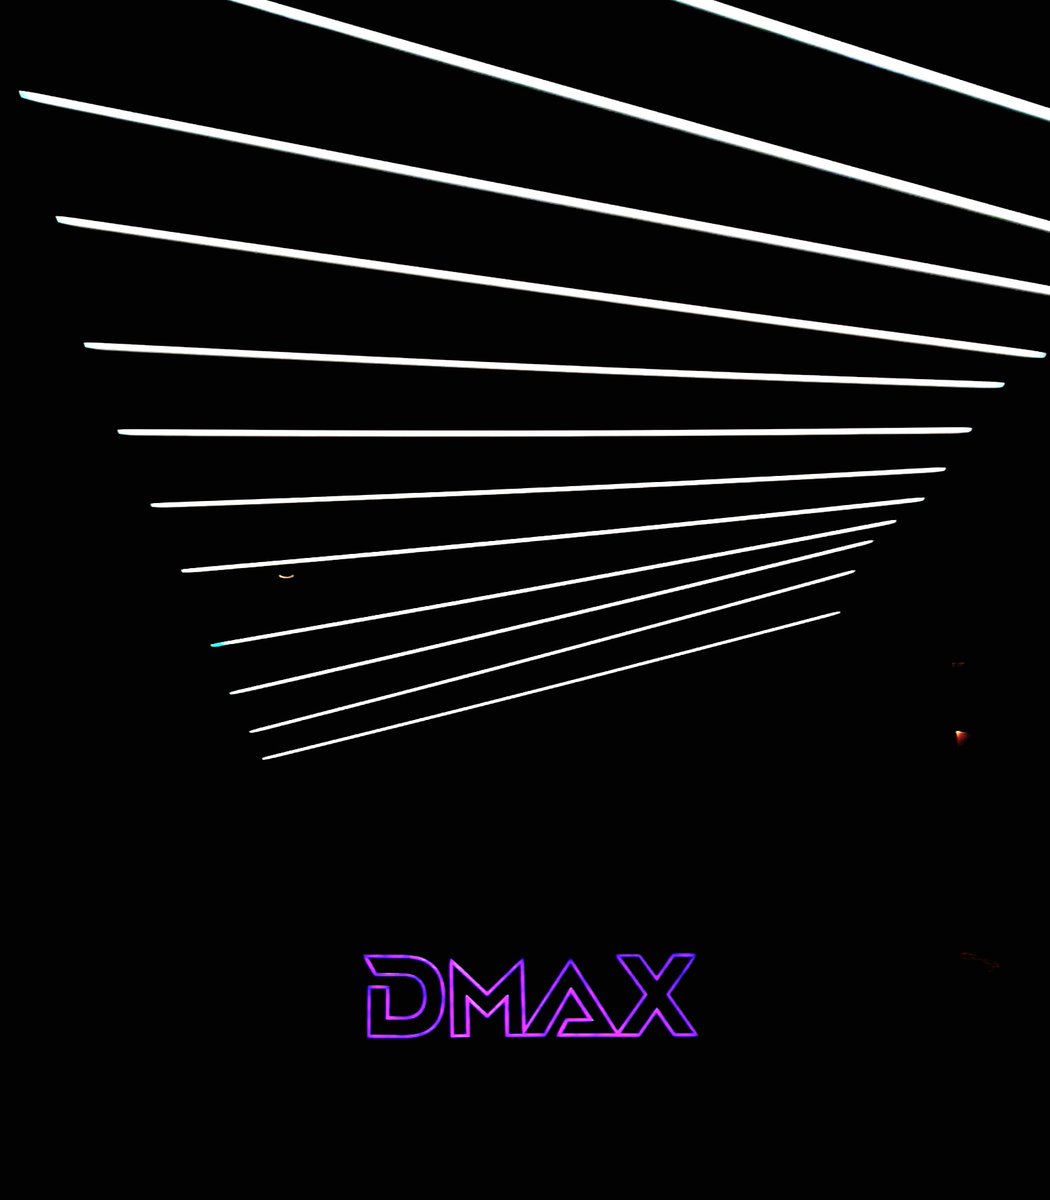 It's been one year since we started experiencing the world-class theatrical experience in our own hometown!! 
Thank You @dnctheatresoffl.

#1YearofDMAX

@Dpicinemas 
#DMAXbyDnctheatres